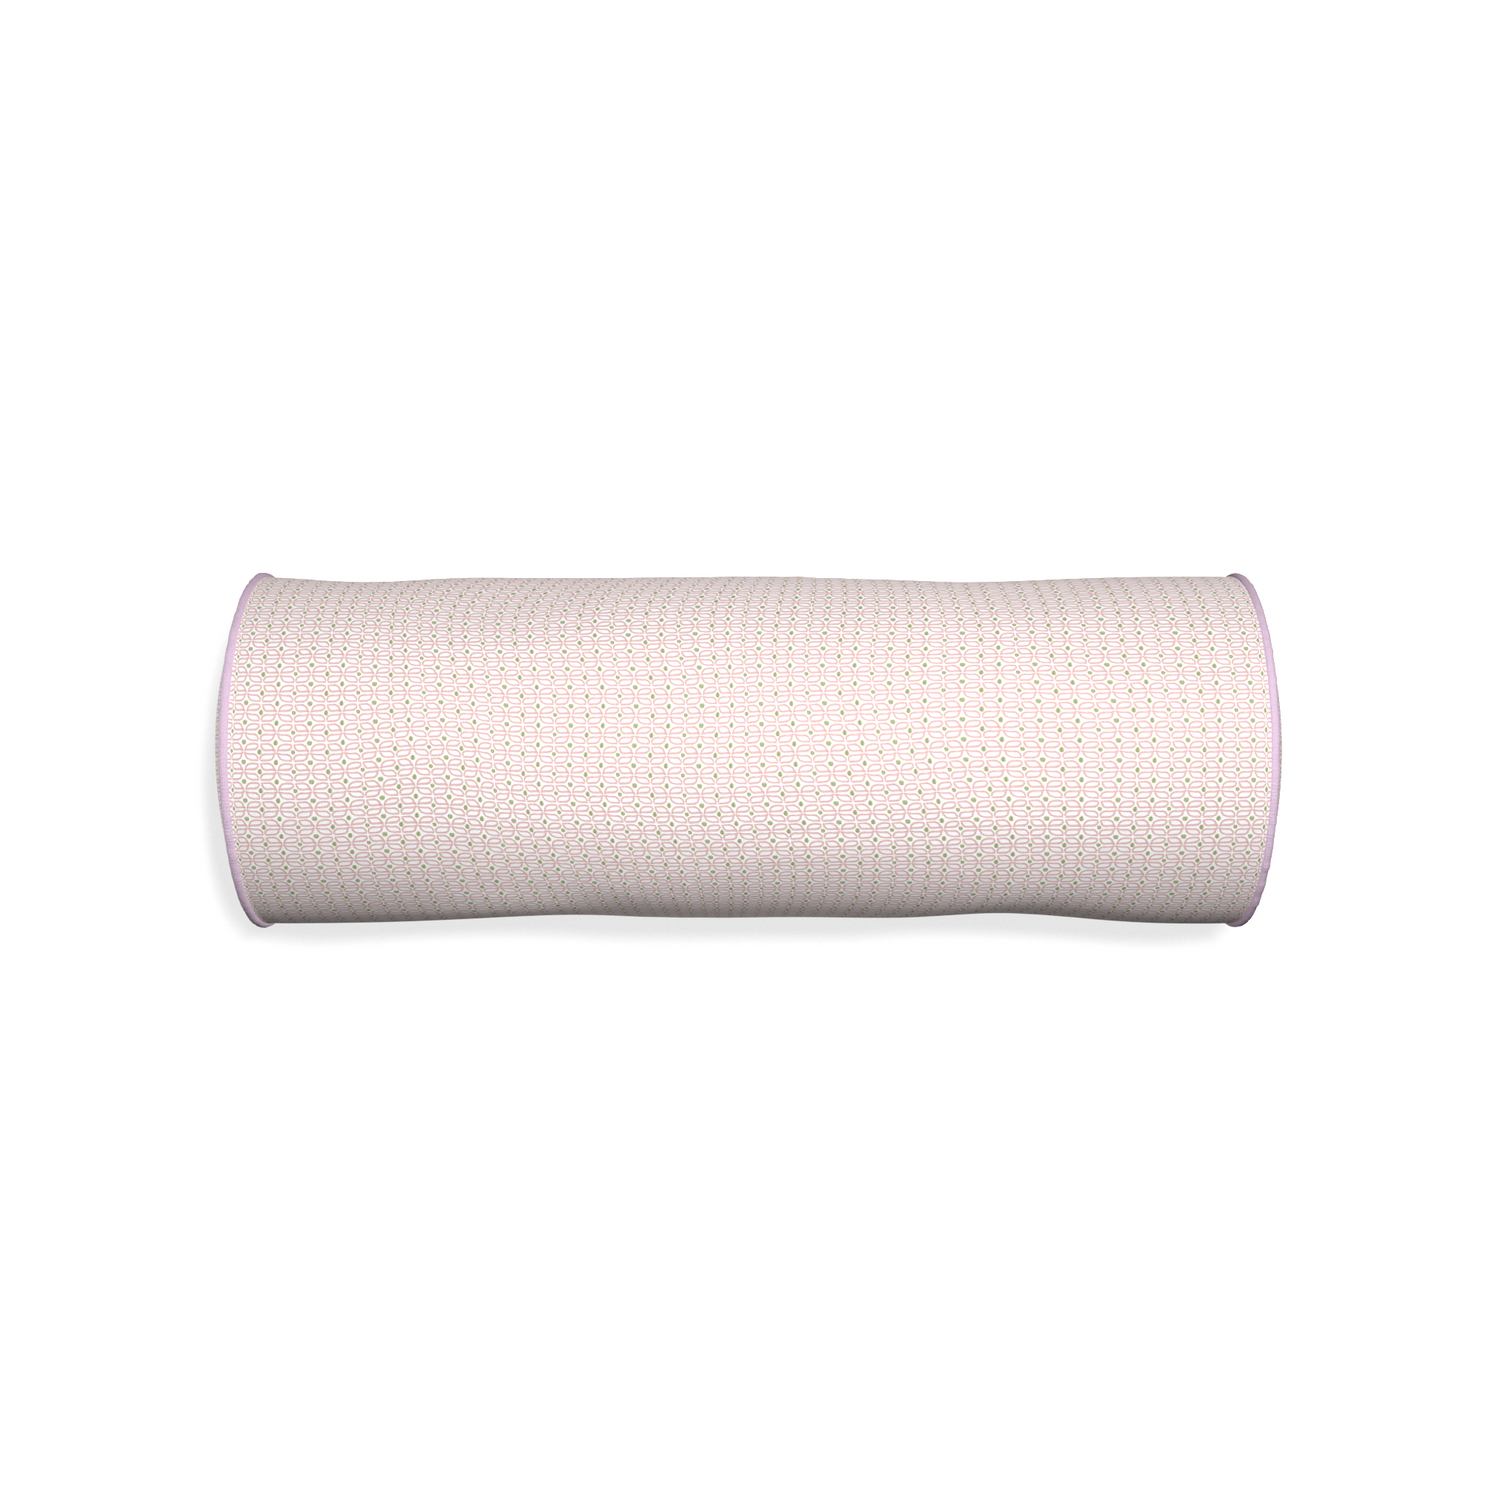 Bolster loomi pink custom pillow with l piping on white background